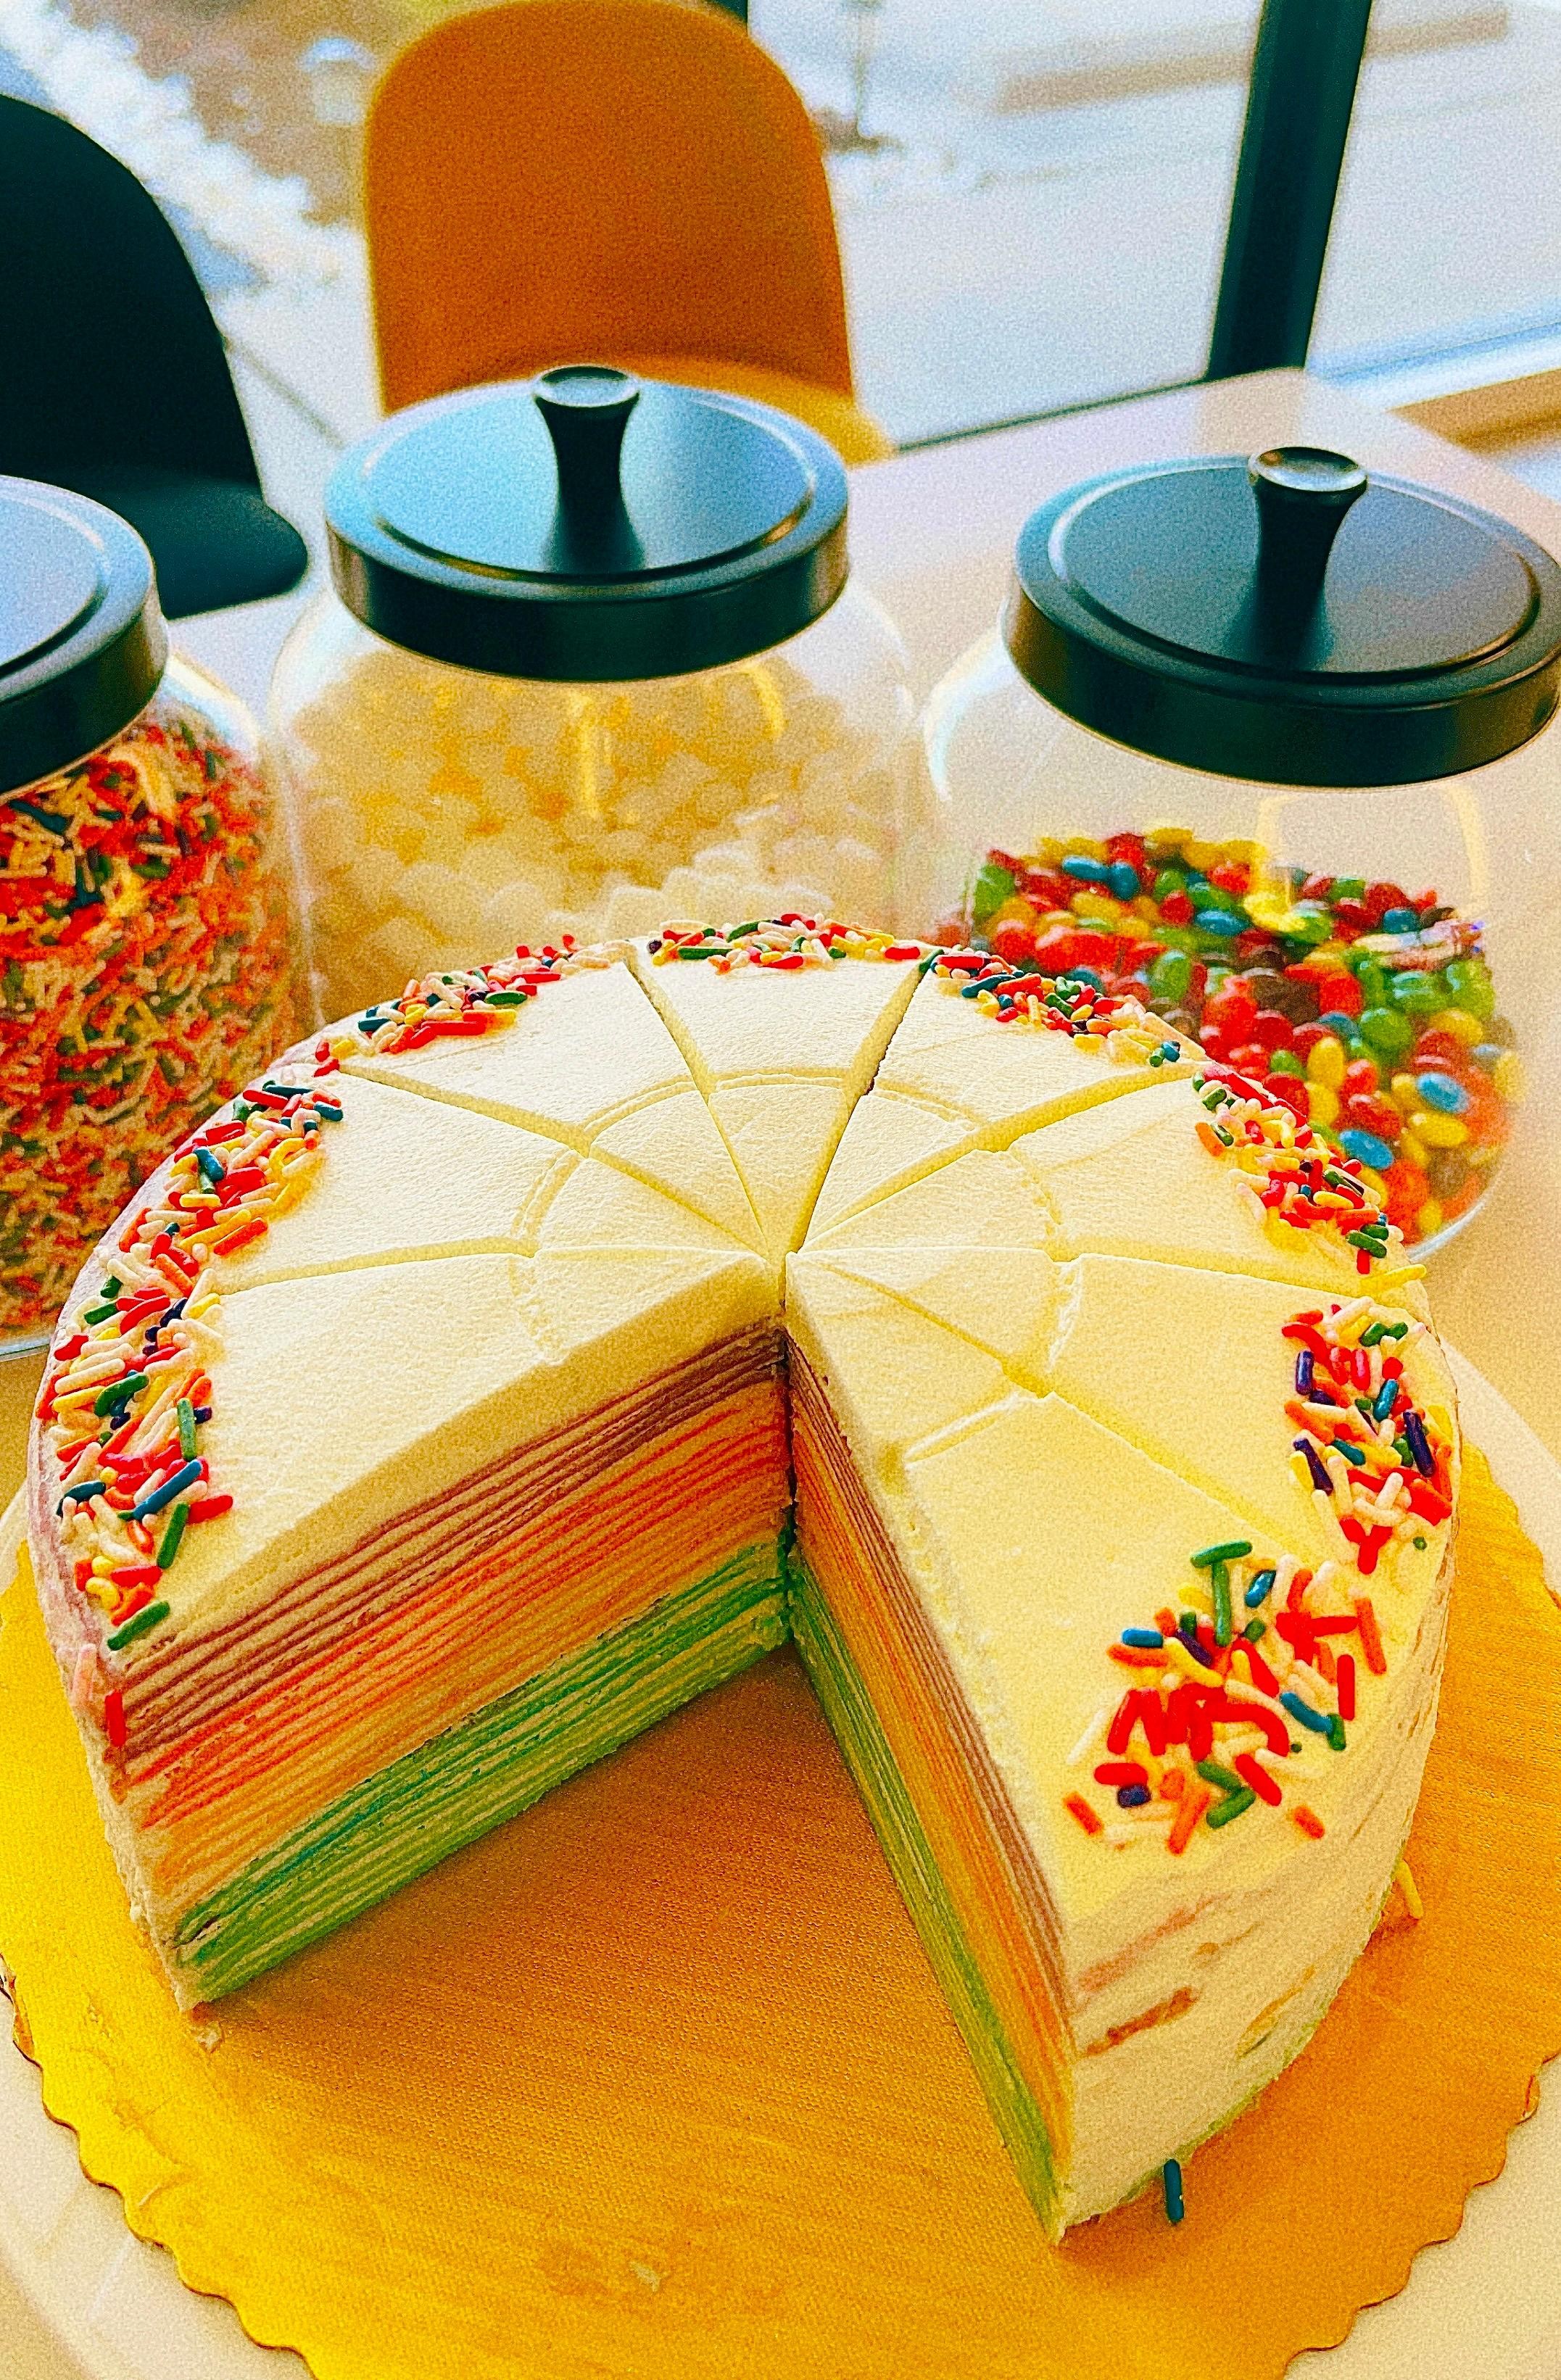 Rain Bow Mille Crepes